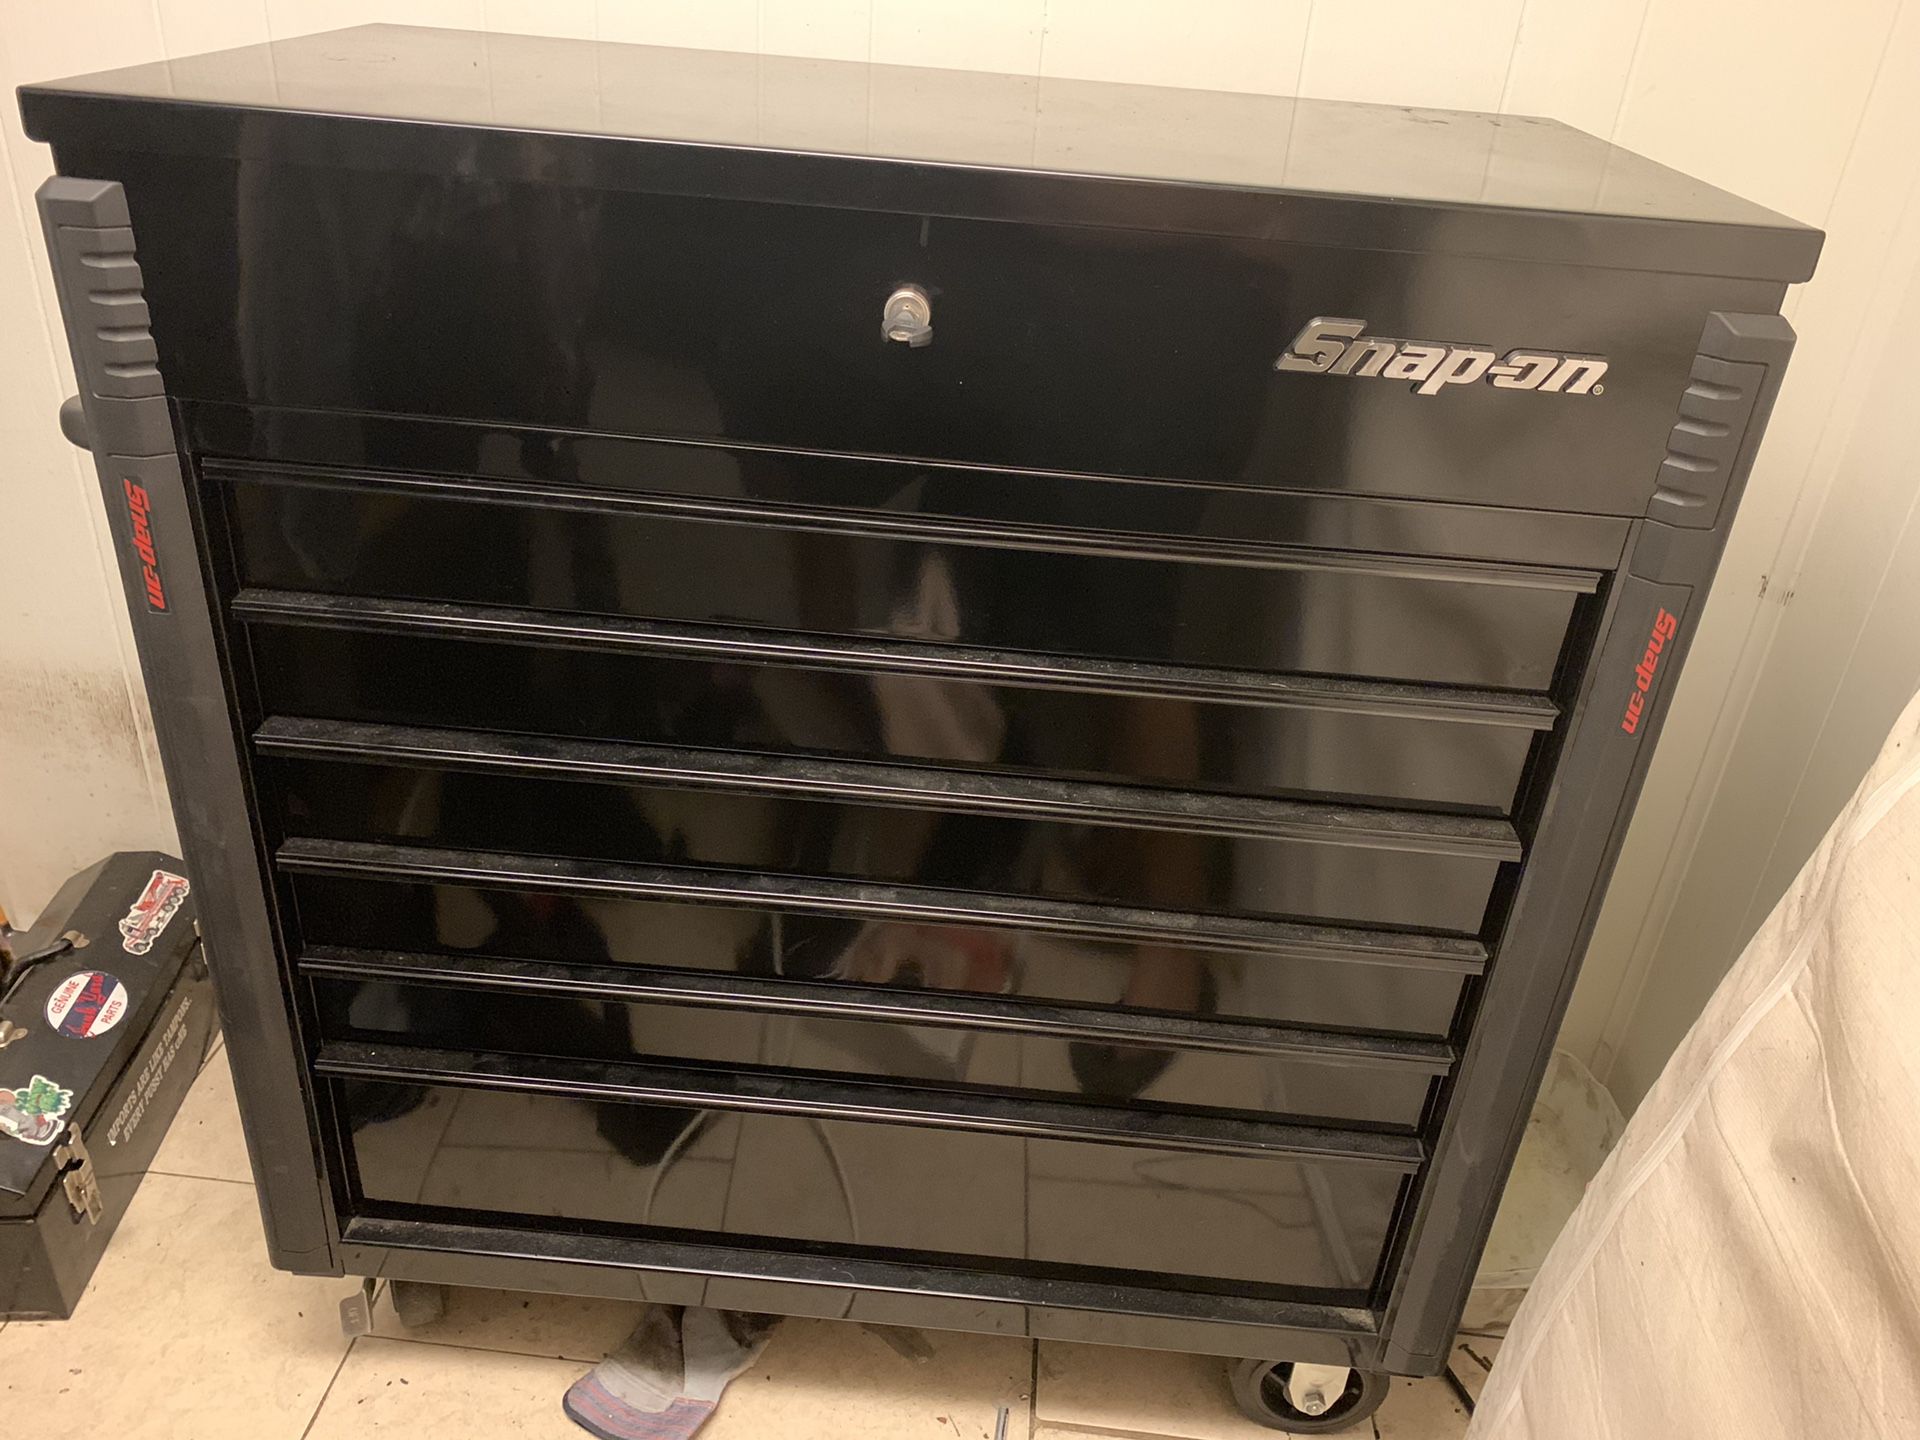 Snap-on tool box fo sale or trade